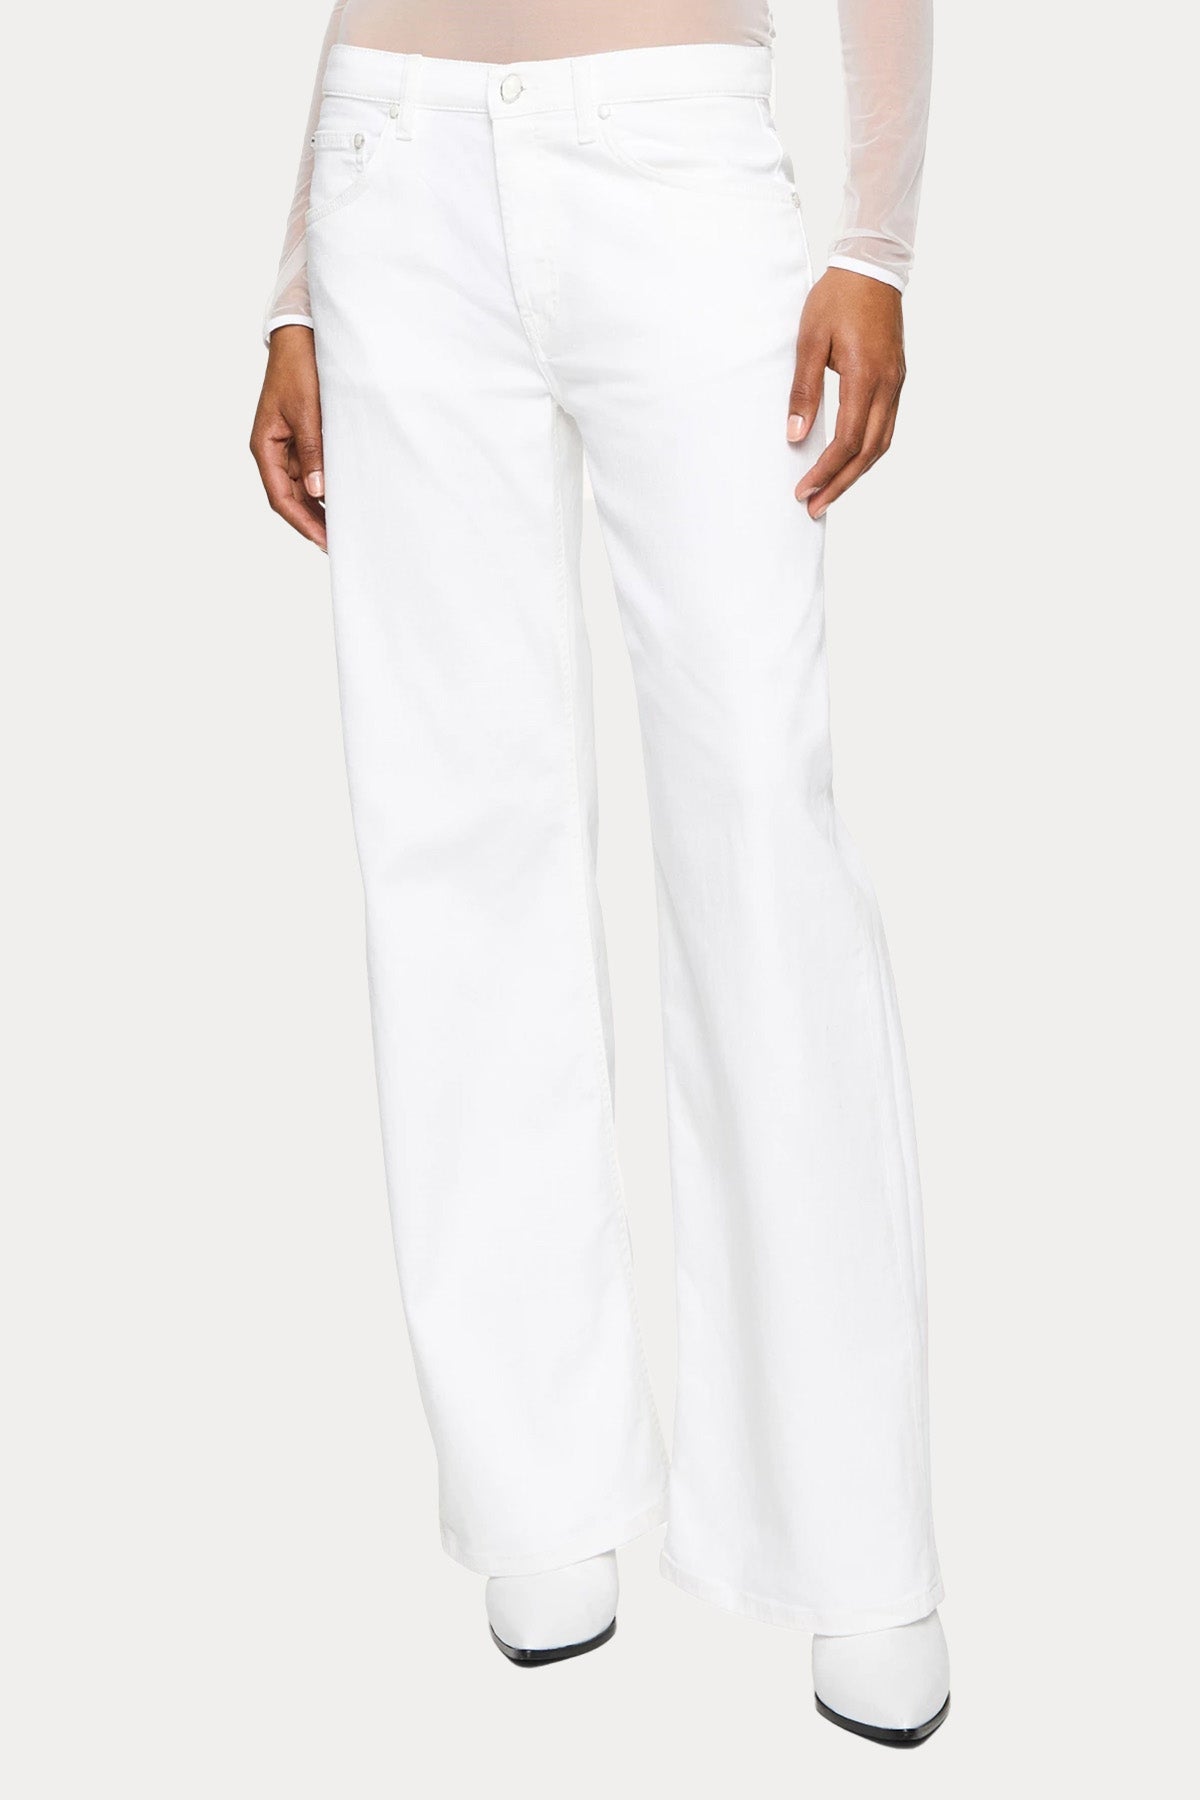 Dondup Jacklyn Loose Fit Jeans